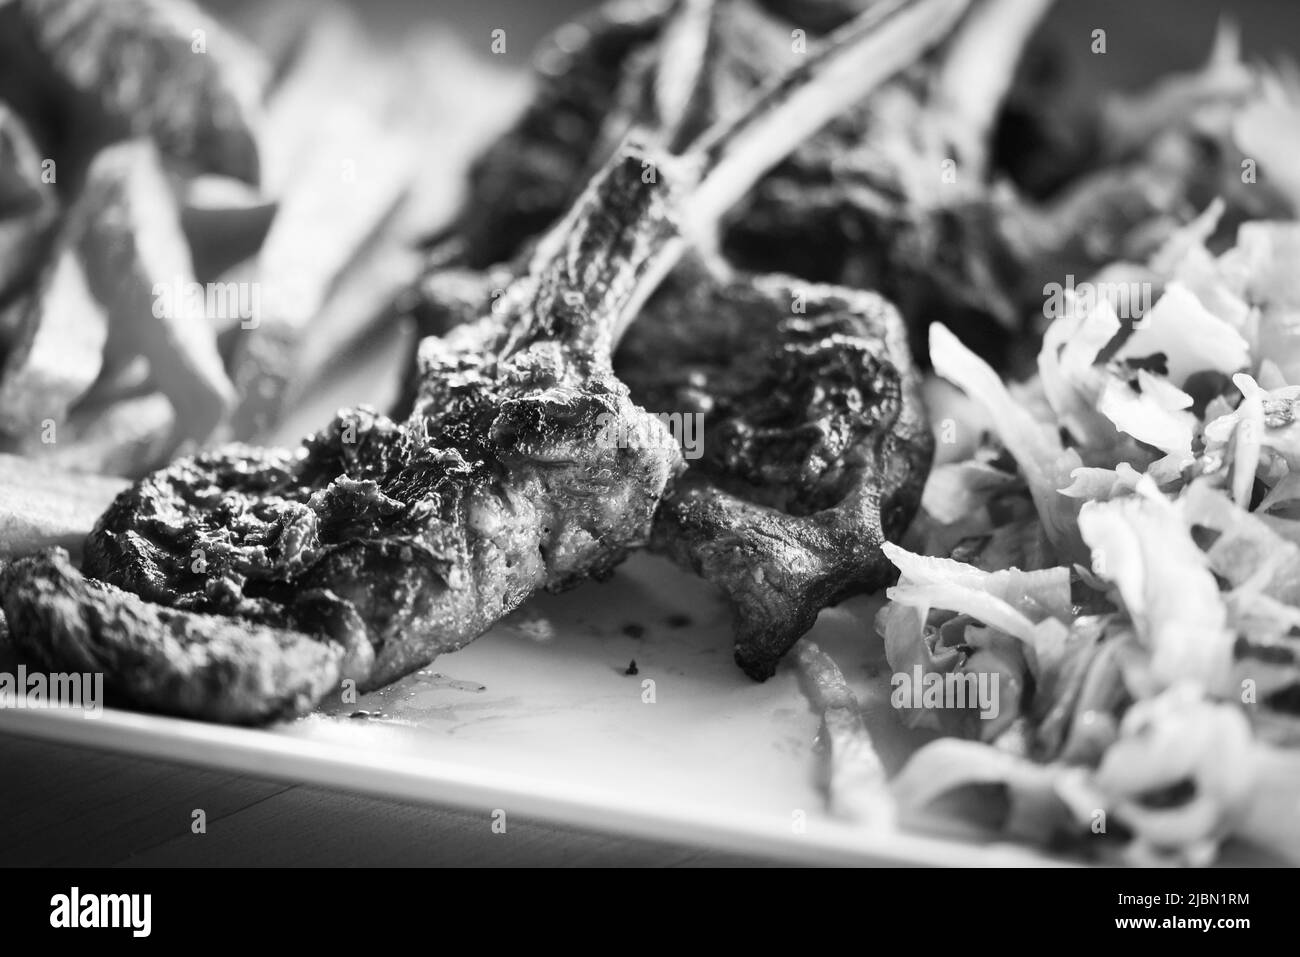 delicious grilled lamb chopsticks with french fries, pesto sauce & mix of lettuces Stock Photo